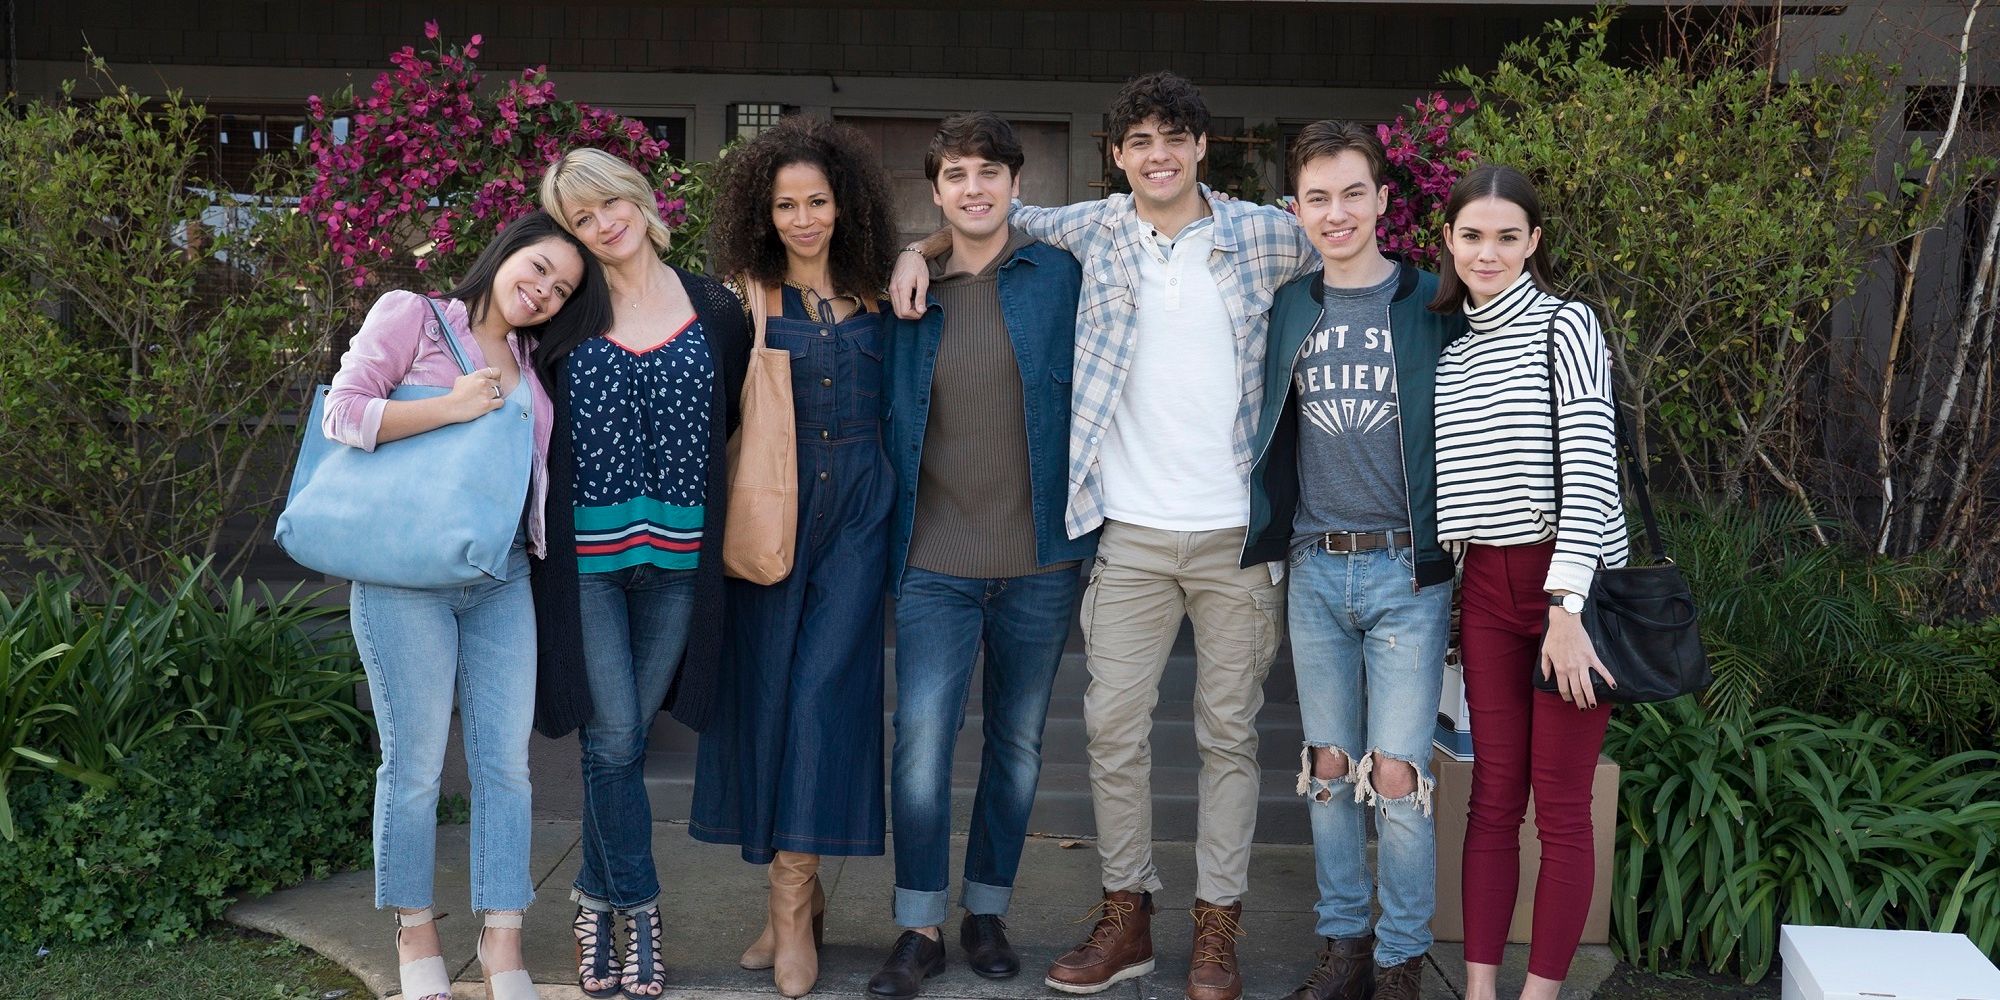 The Fosters 5 Things That Changed After The Pilot (& 5 That Stayed The Same)